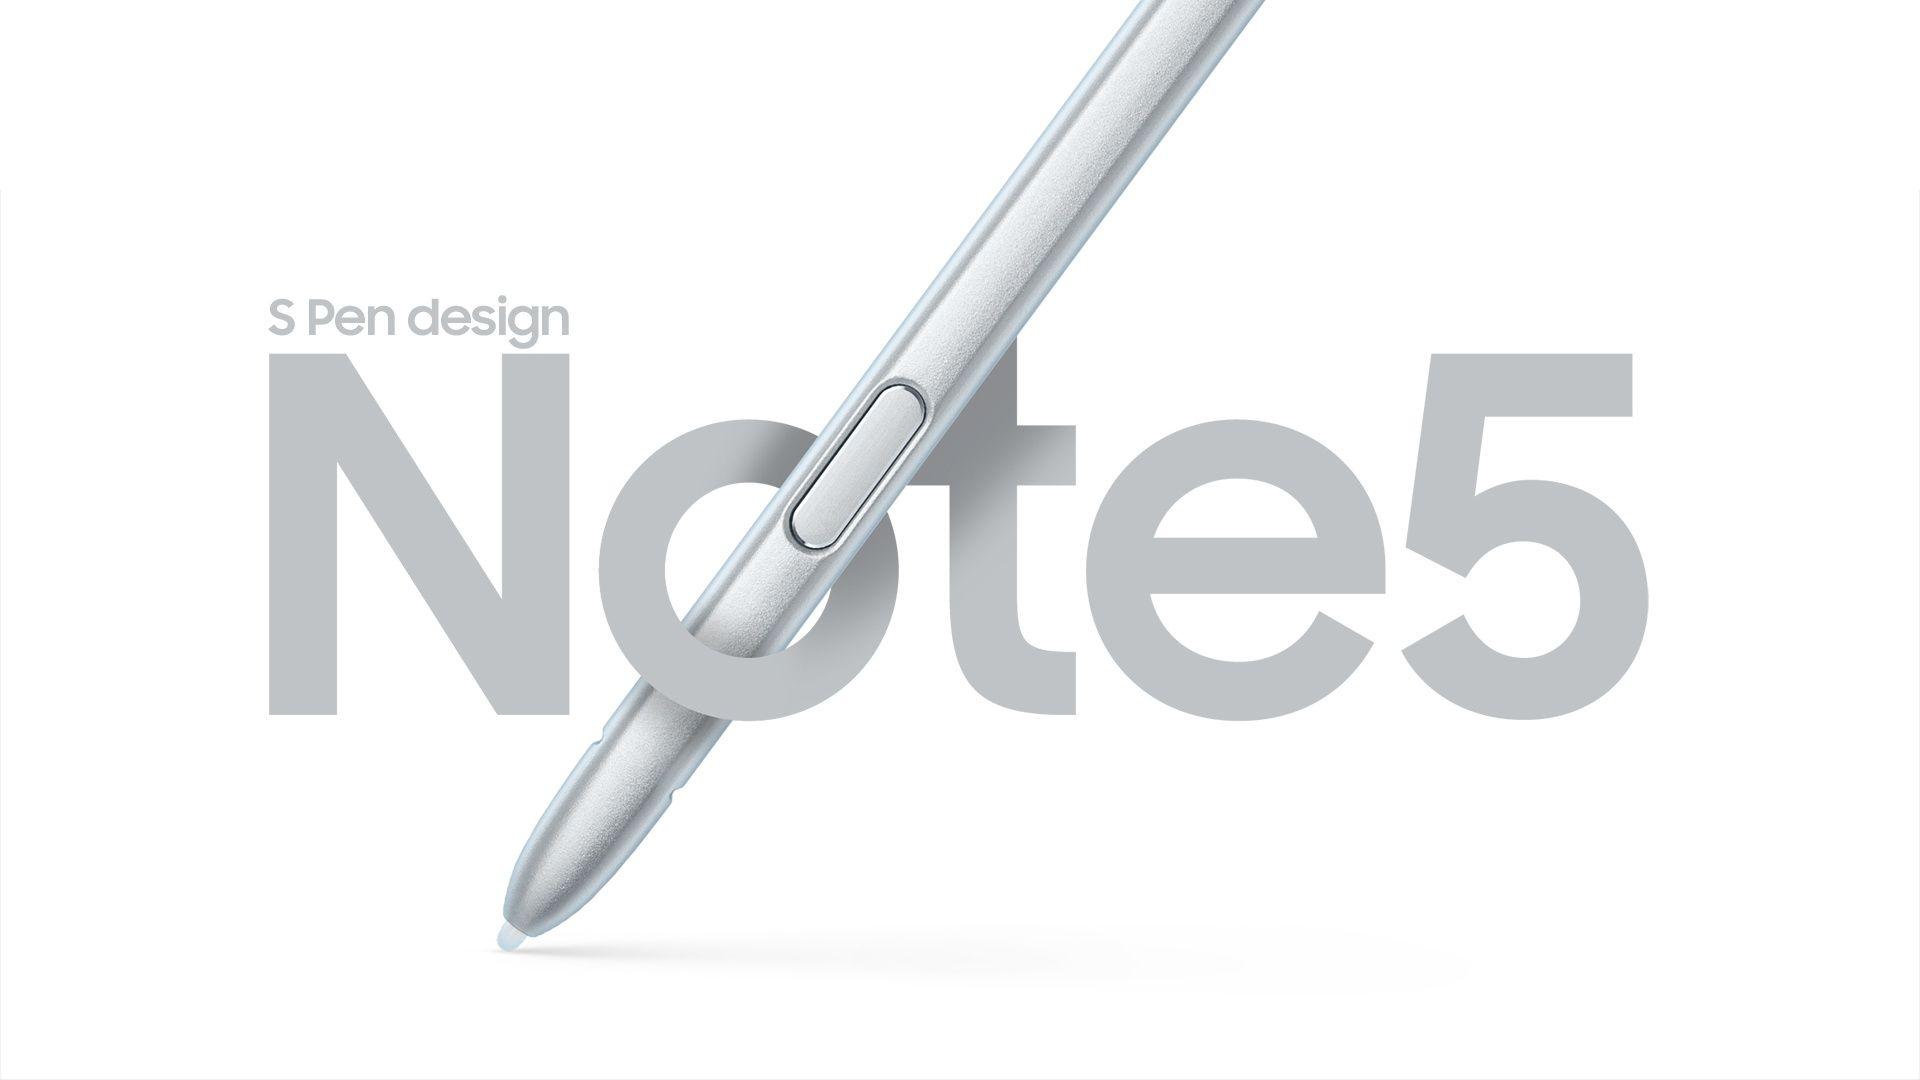 Samsung Galaxy Note 5 Logo - Samsung Galaxy Note 5 Will Have MicroSD Card Slot, But There's a